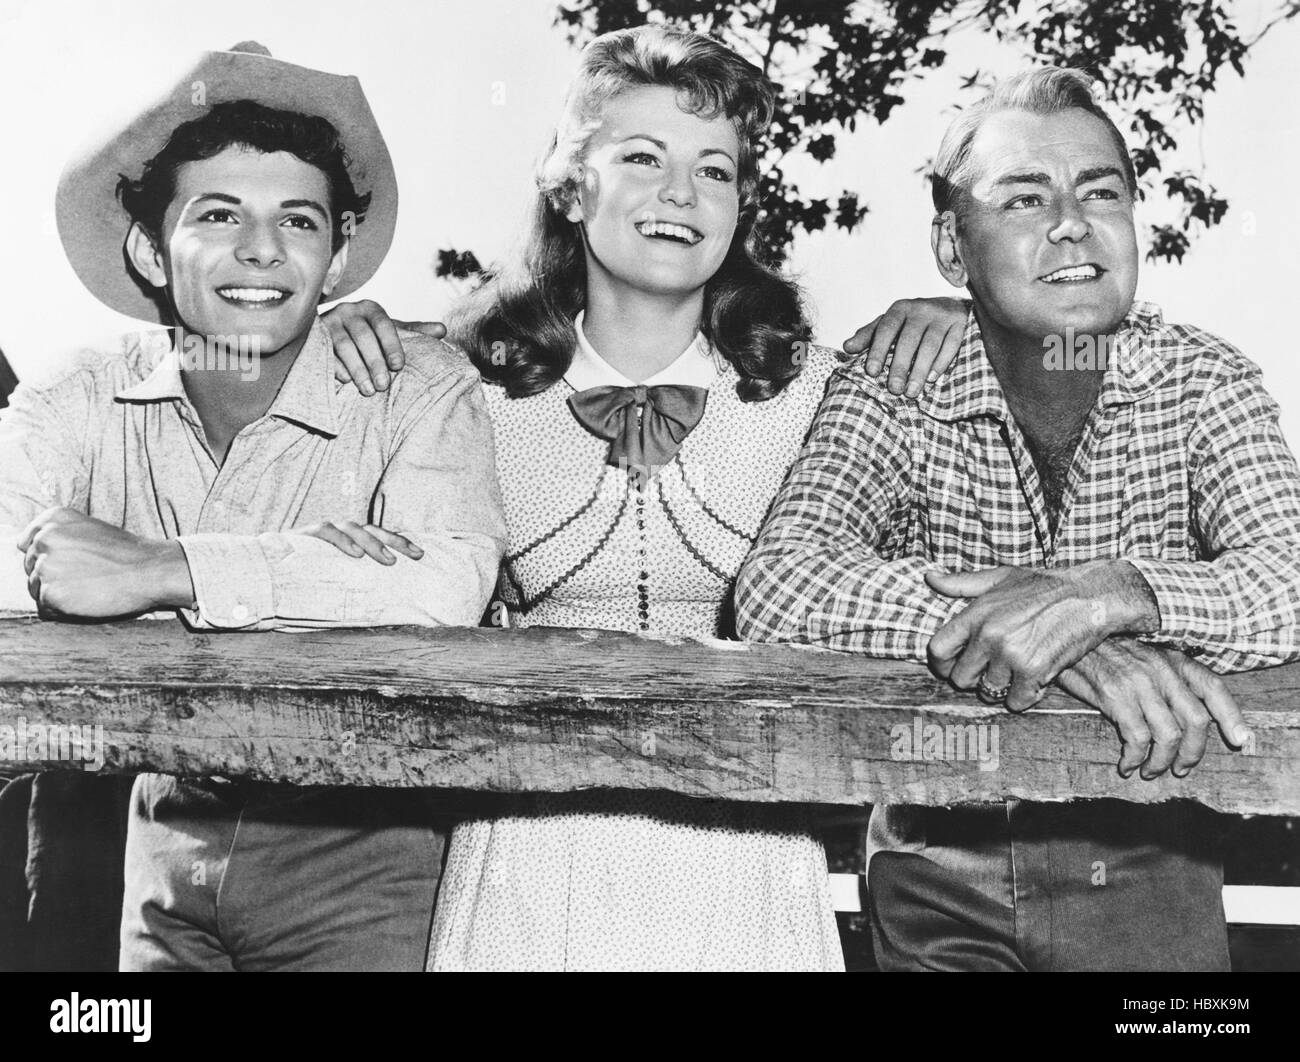 GUNS OF THE TIMBERLAND, from left: Frankie Avalon, Alana Ladd, Alan ...